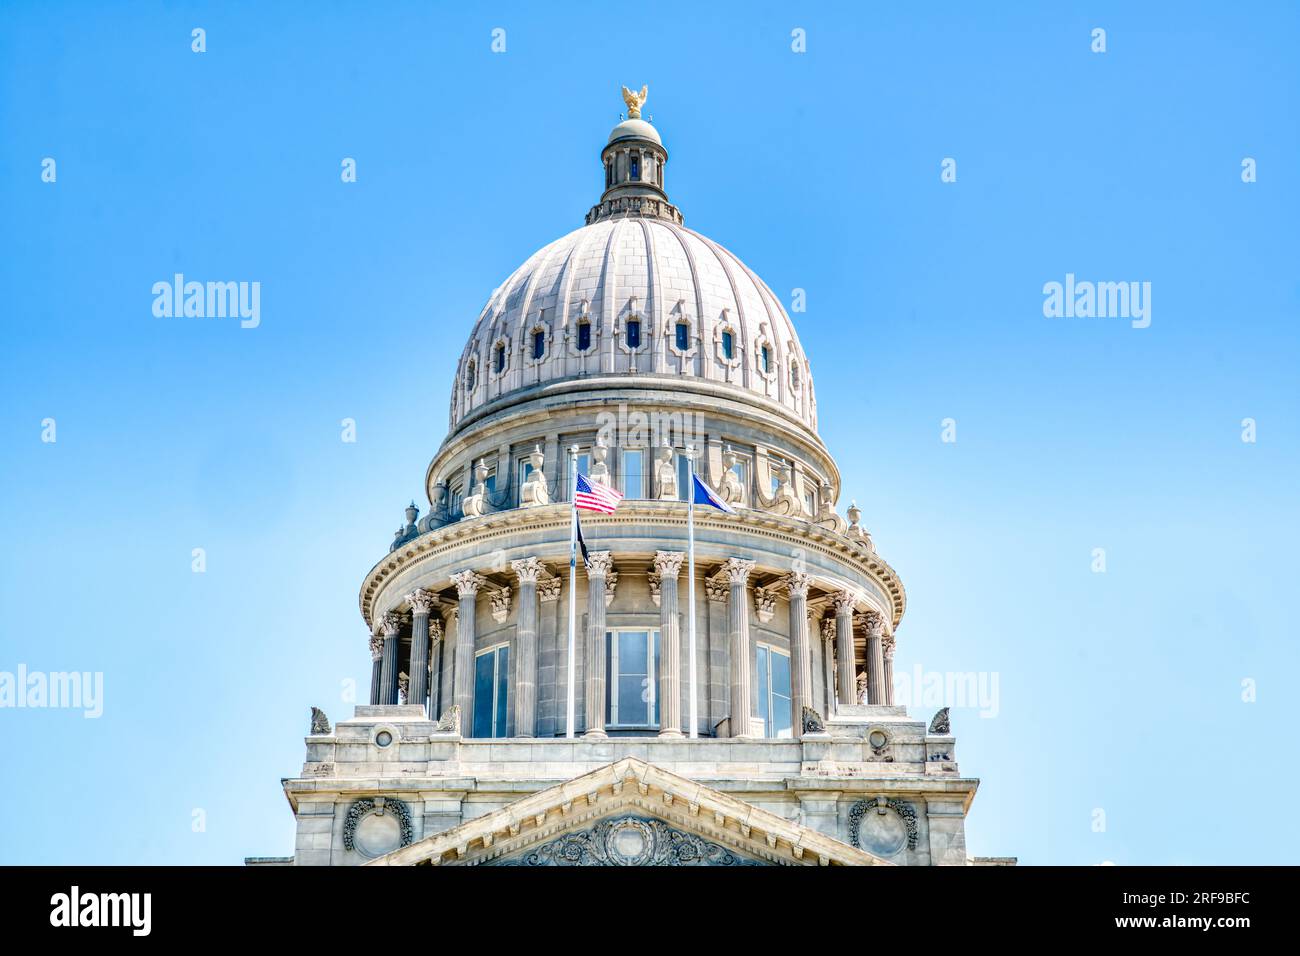 Dome of the Idaho State Capitol Building in downtown capital city of Boise, Idaho Stock Photo